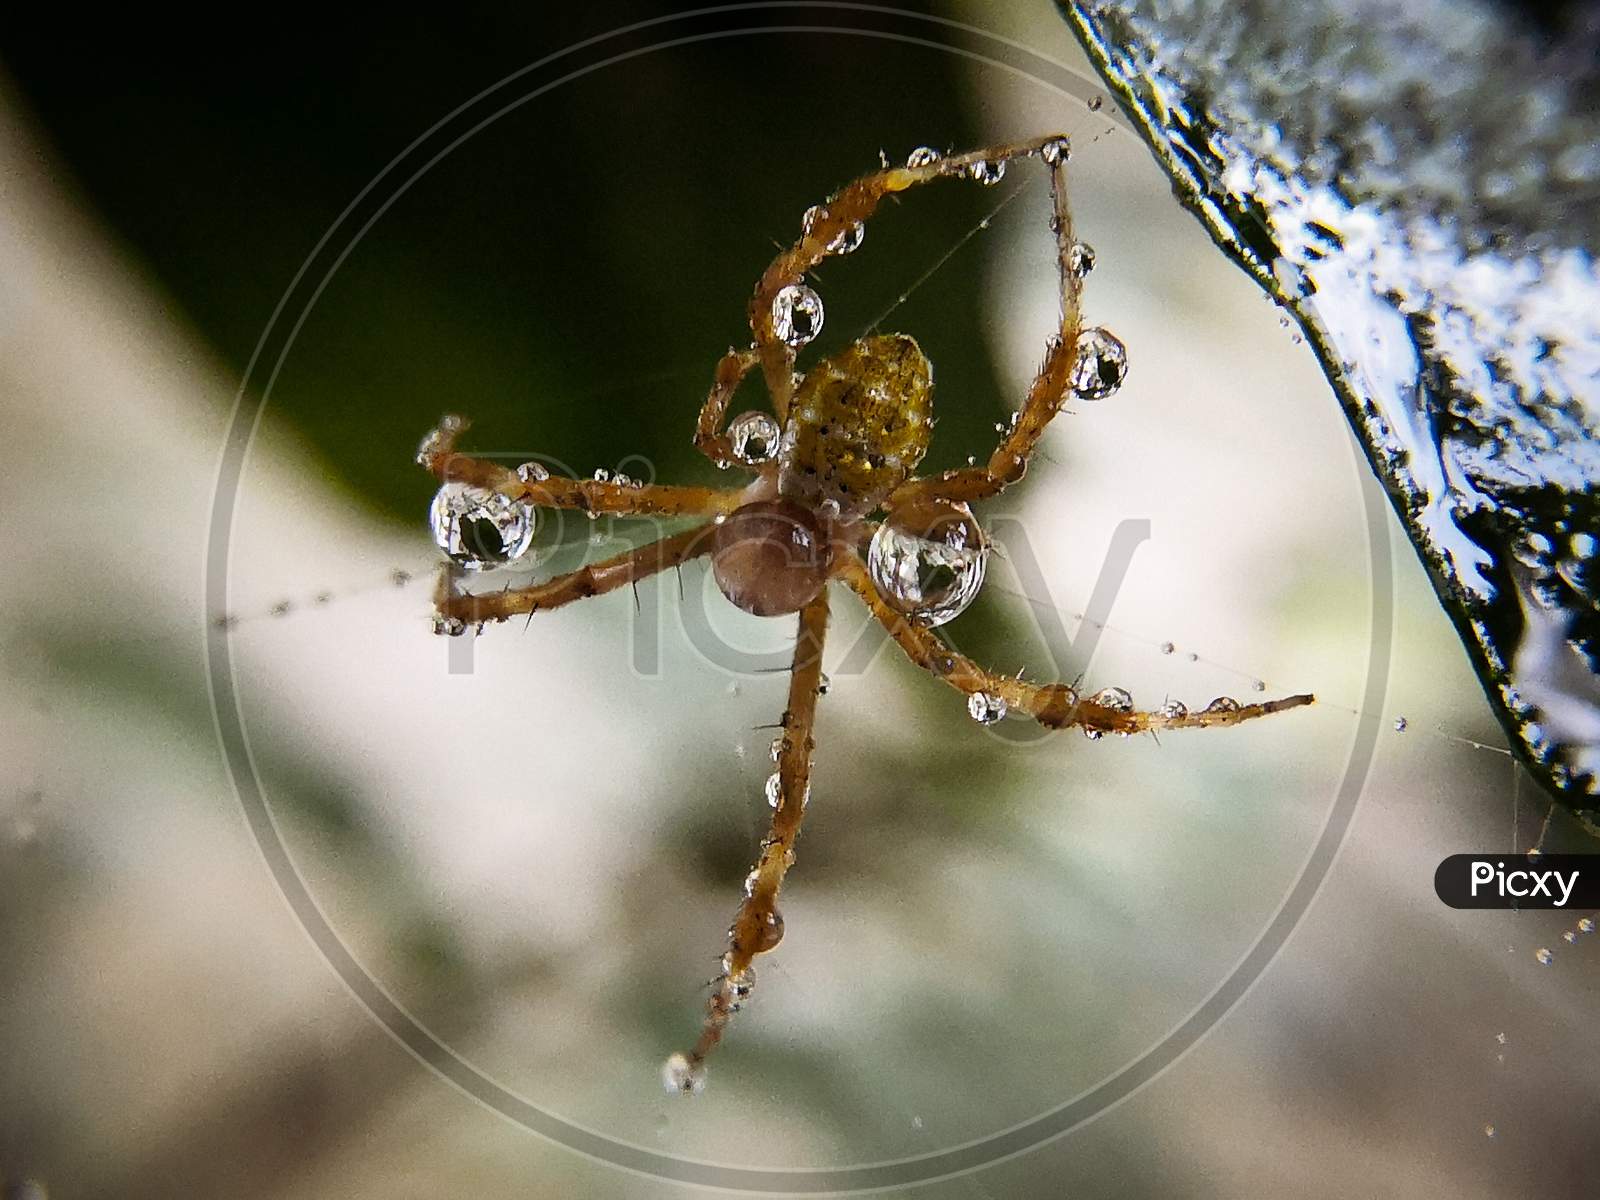 A spider after getting shower in rain....